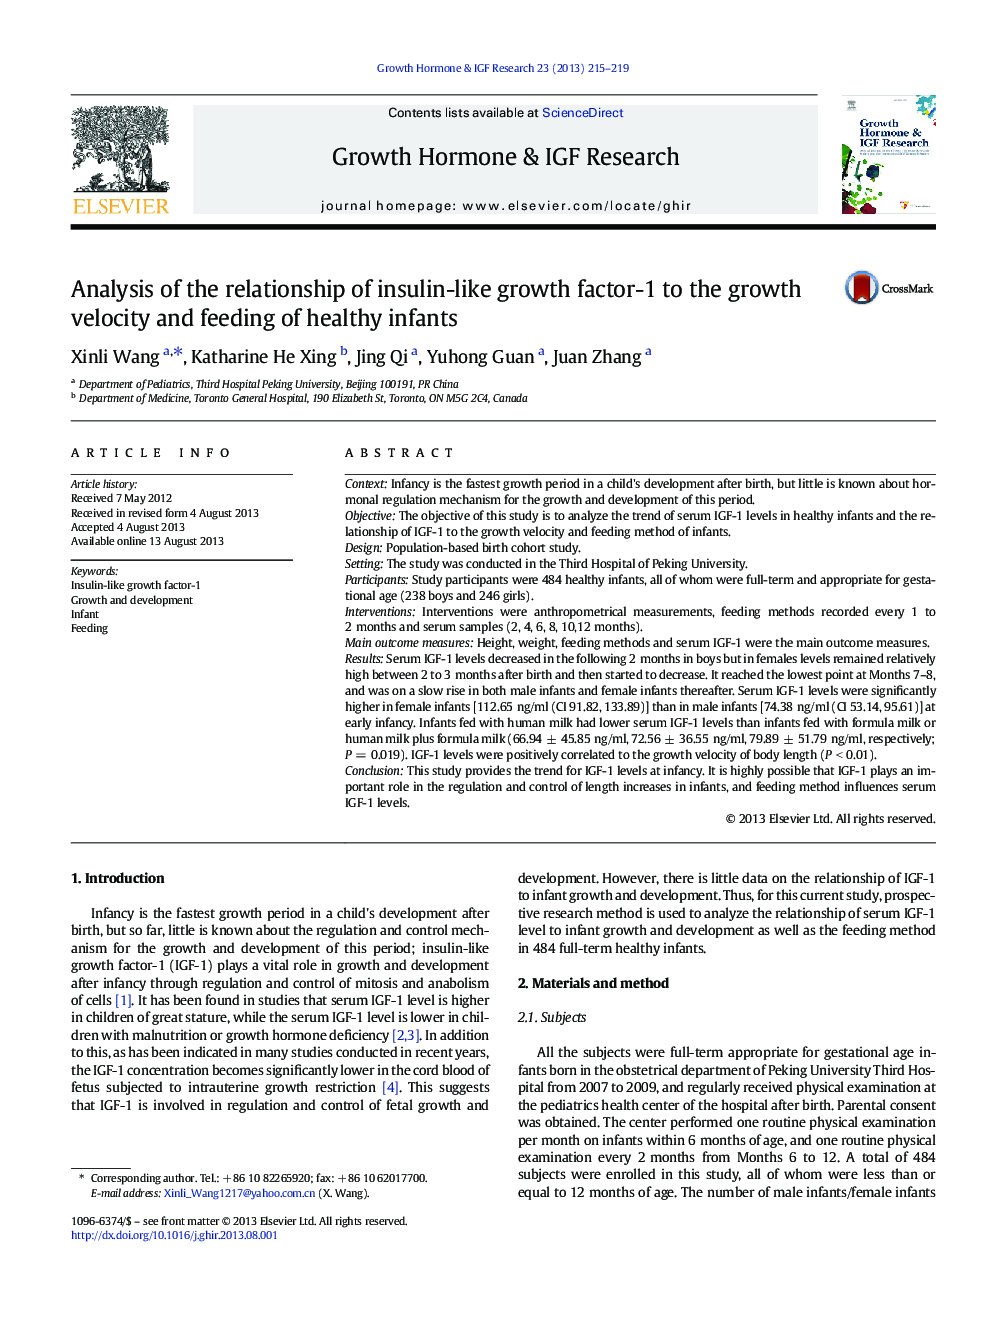 Analysis of the relationship of insulin-like growth factor-1 to the growth velocity and feeding of healthy infants